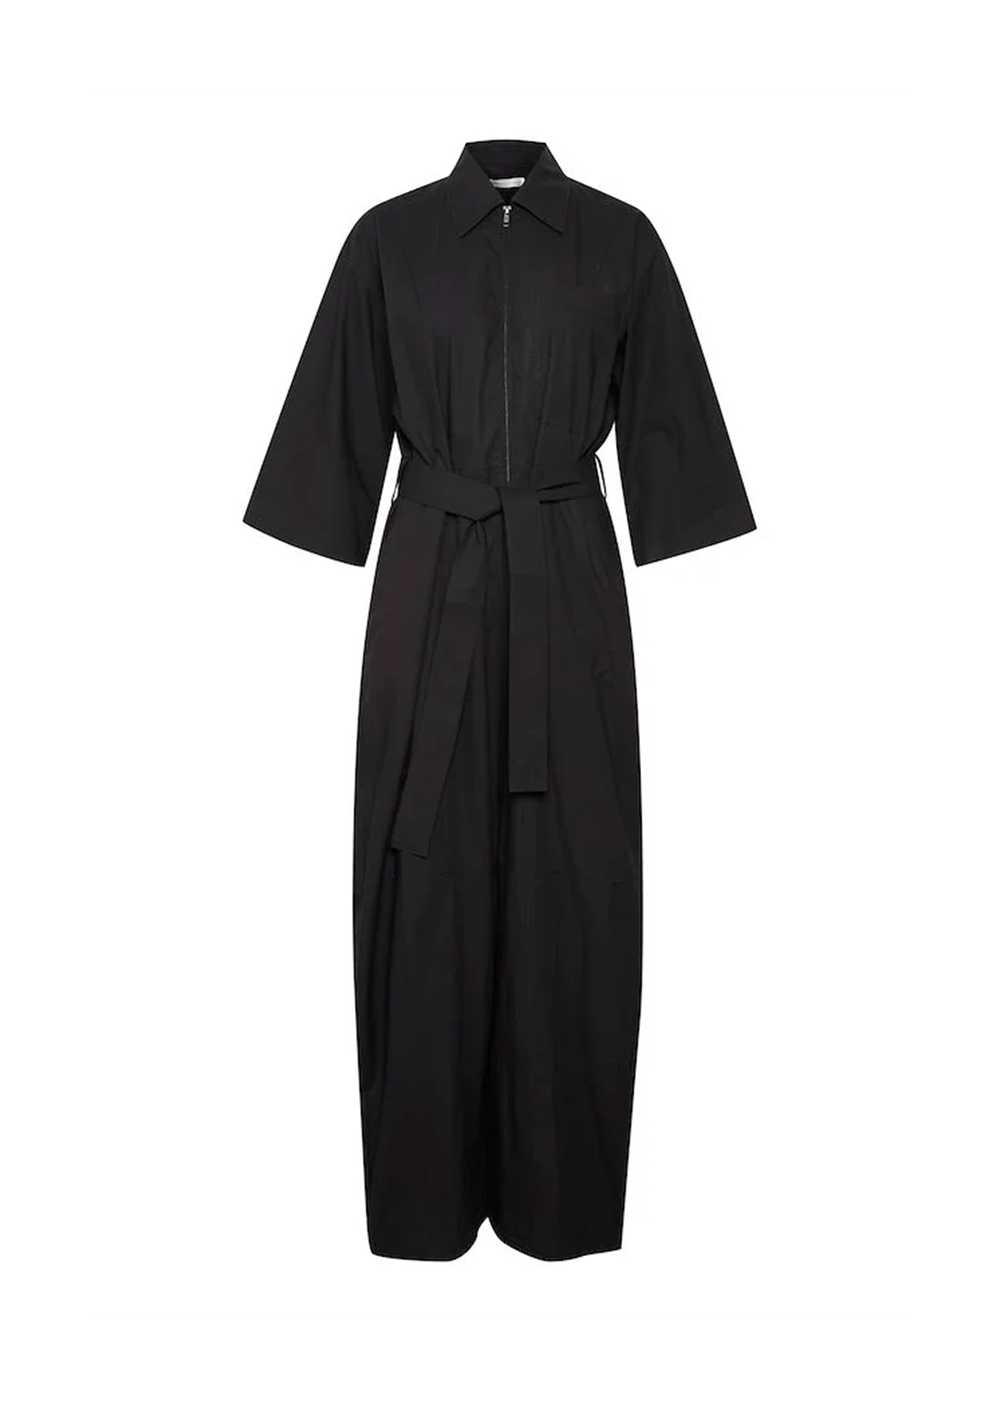 Full front view of the Pinja Jumpsuit in black.